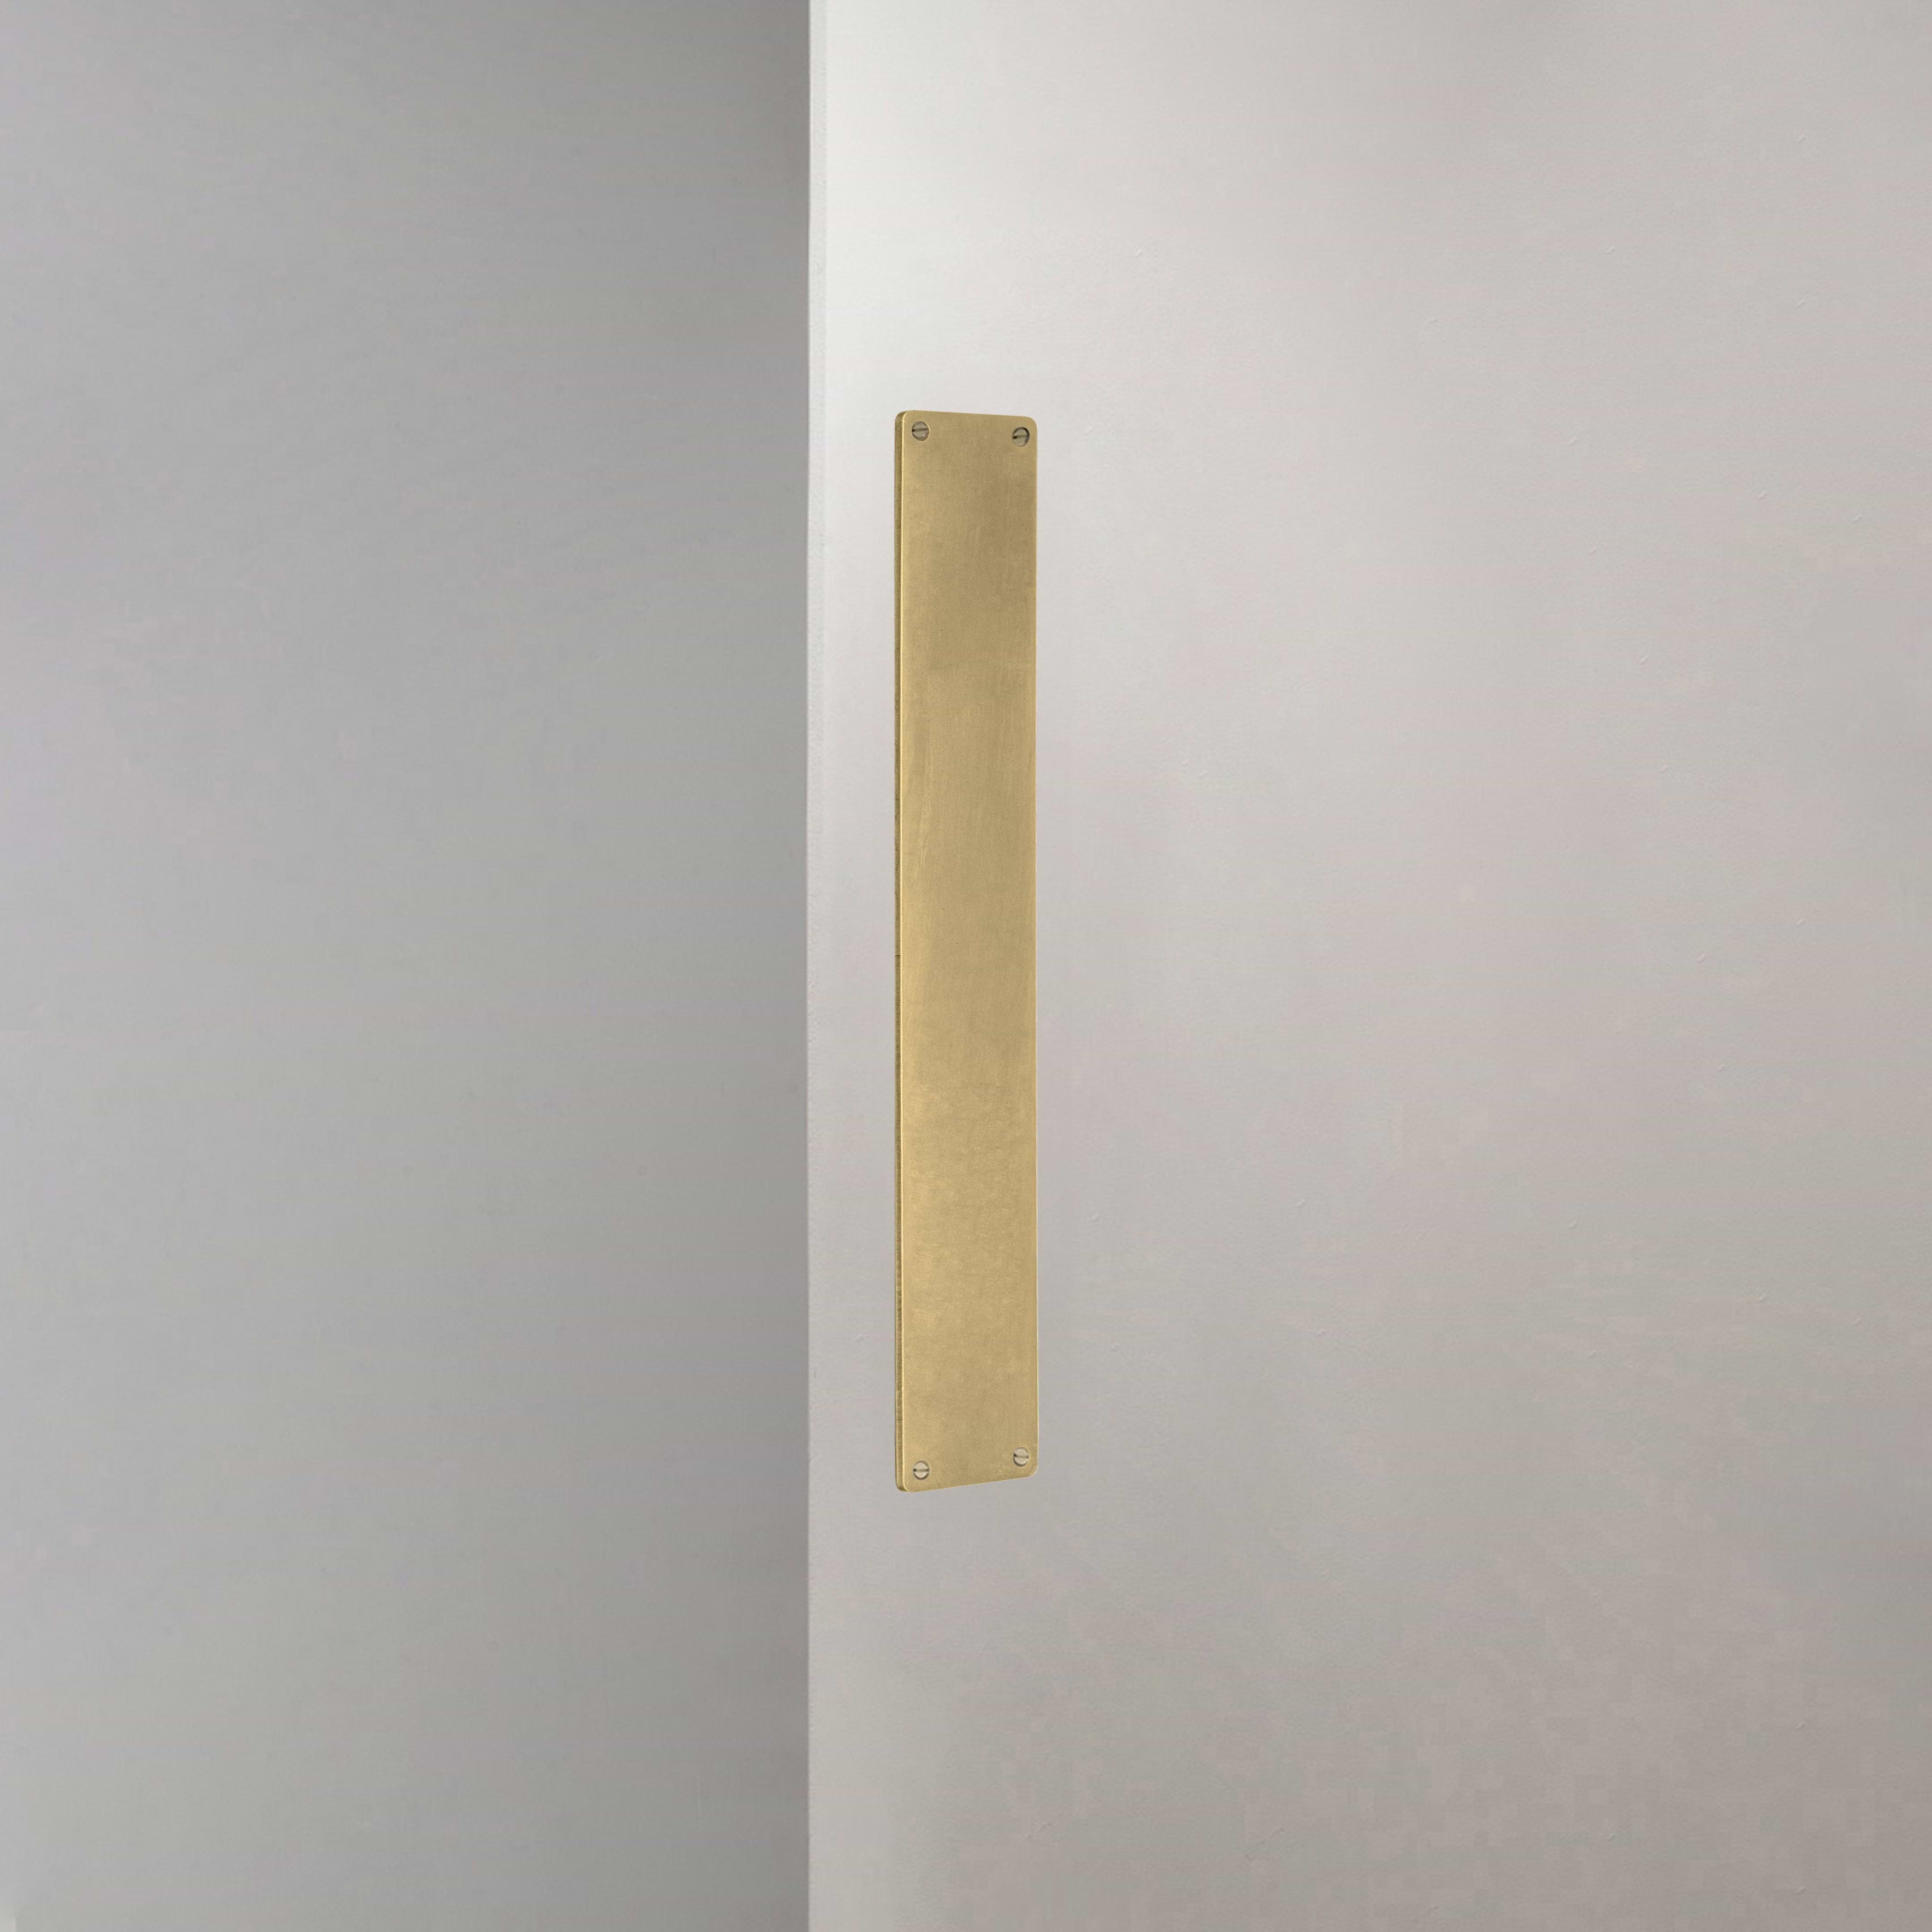 Corston Push Plate in Antique Brass on White Background